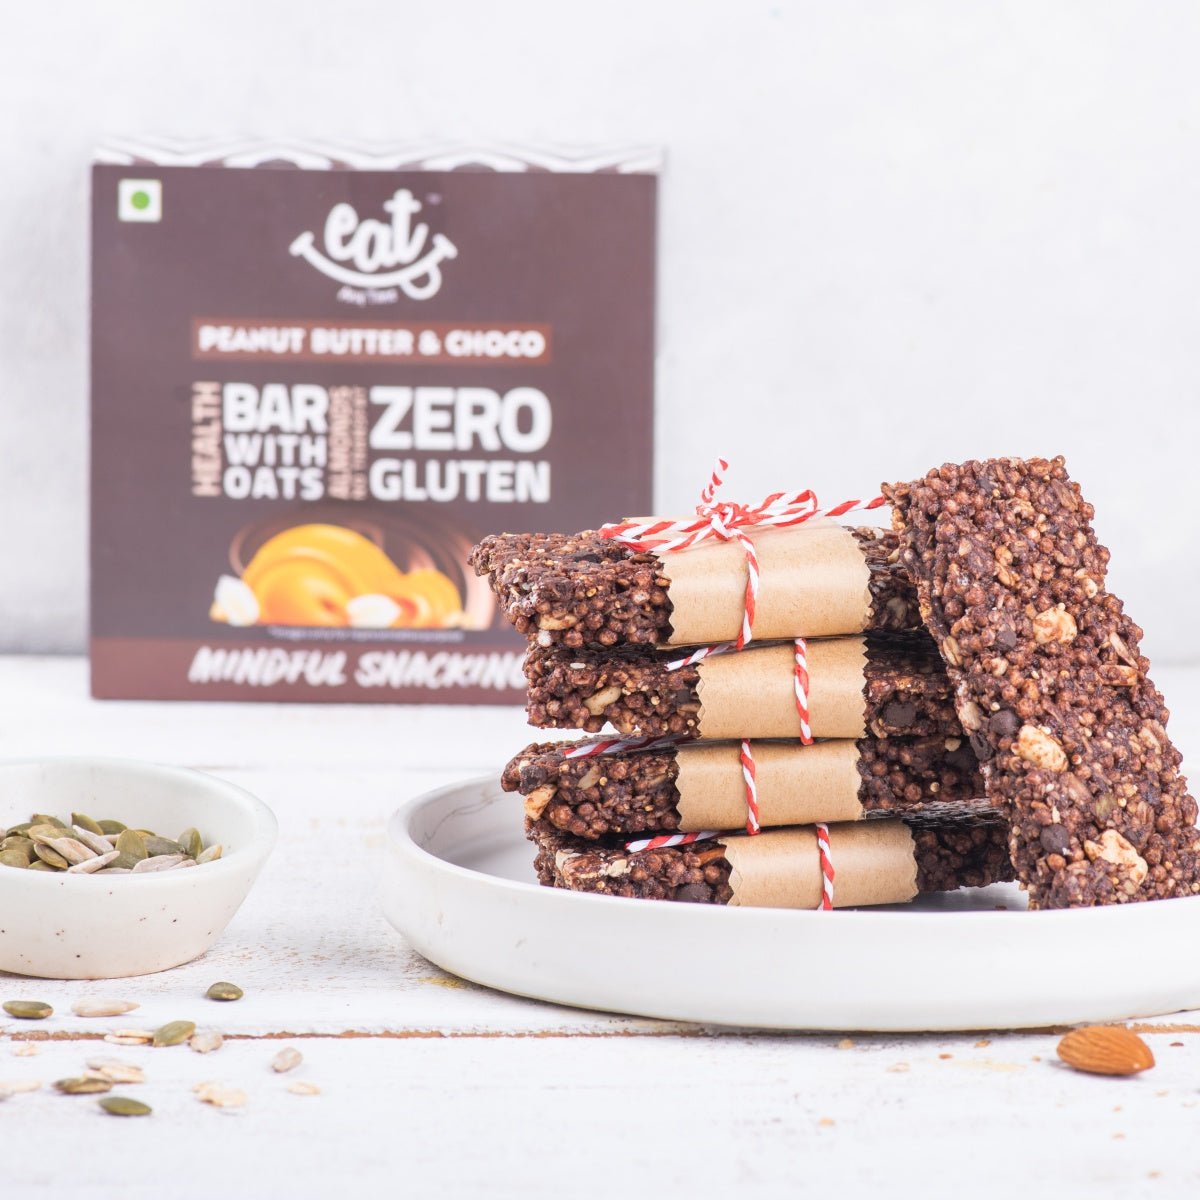 Peanut butter and choco health bar - EAT Anytime